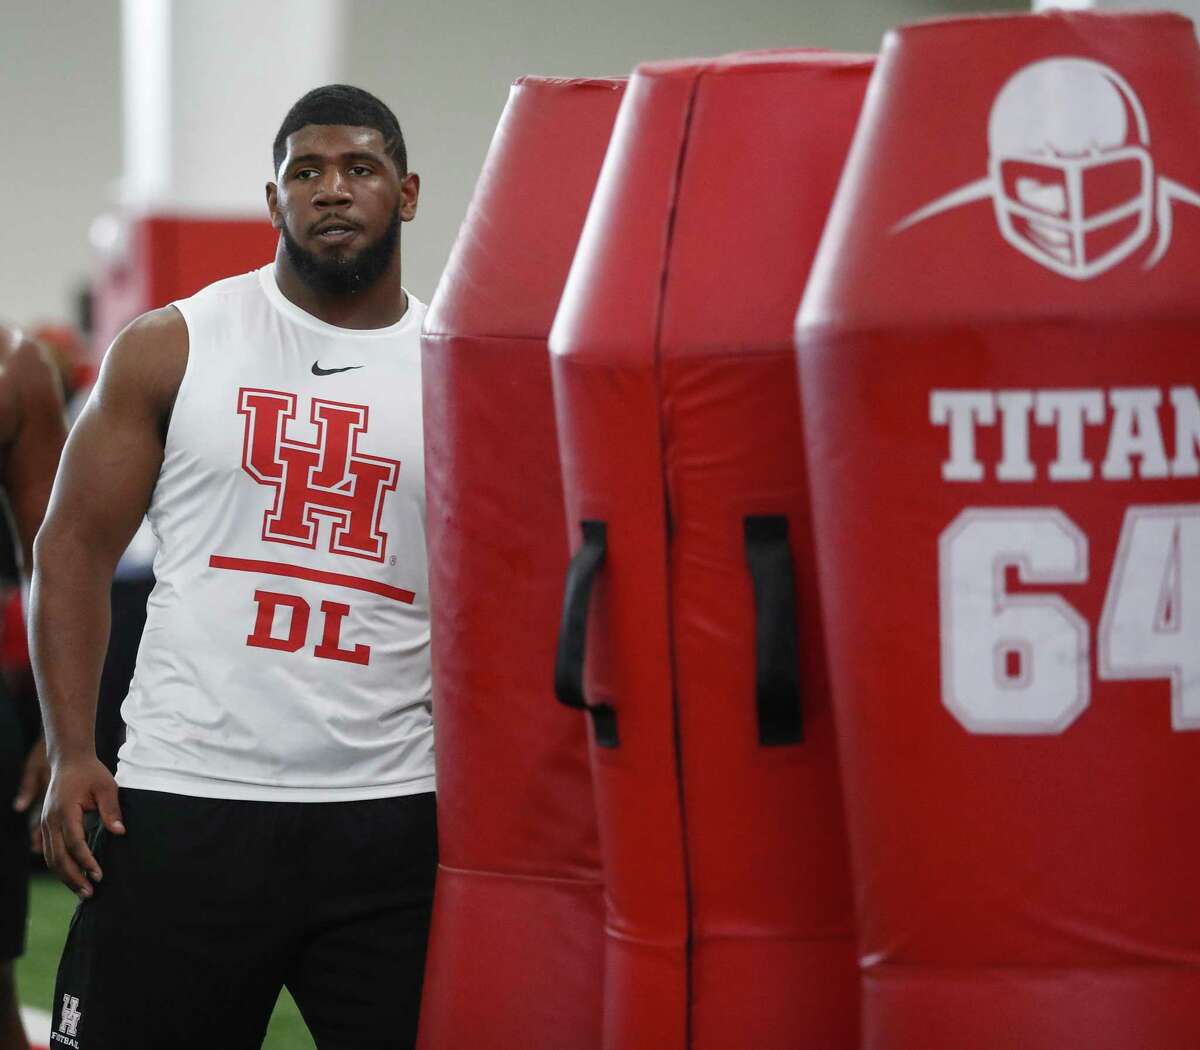 PHOTOS: 2019 UH Pro Day  Ed Oliver participates in position skill work at the University of Houston Pro Day at UH's Indoor Practice Facility, Thursday, March 28, 2019, in Houston. >>>See photos from the University of Houston's Pro Day in Houston on Thursday, March 28, 2019 ... 